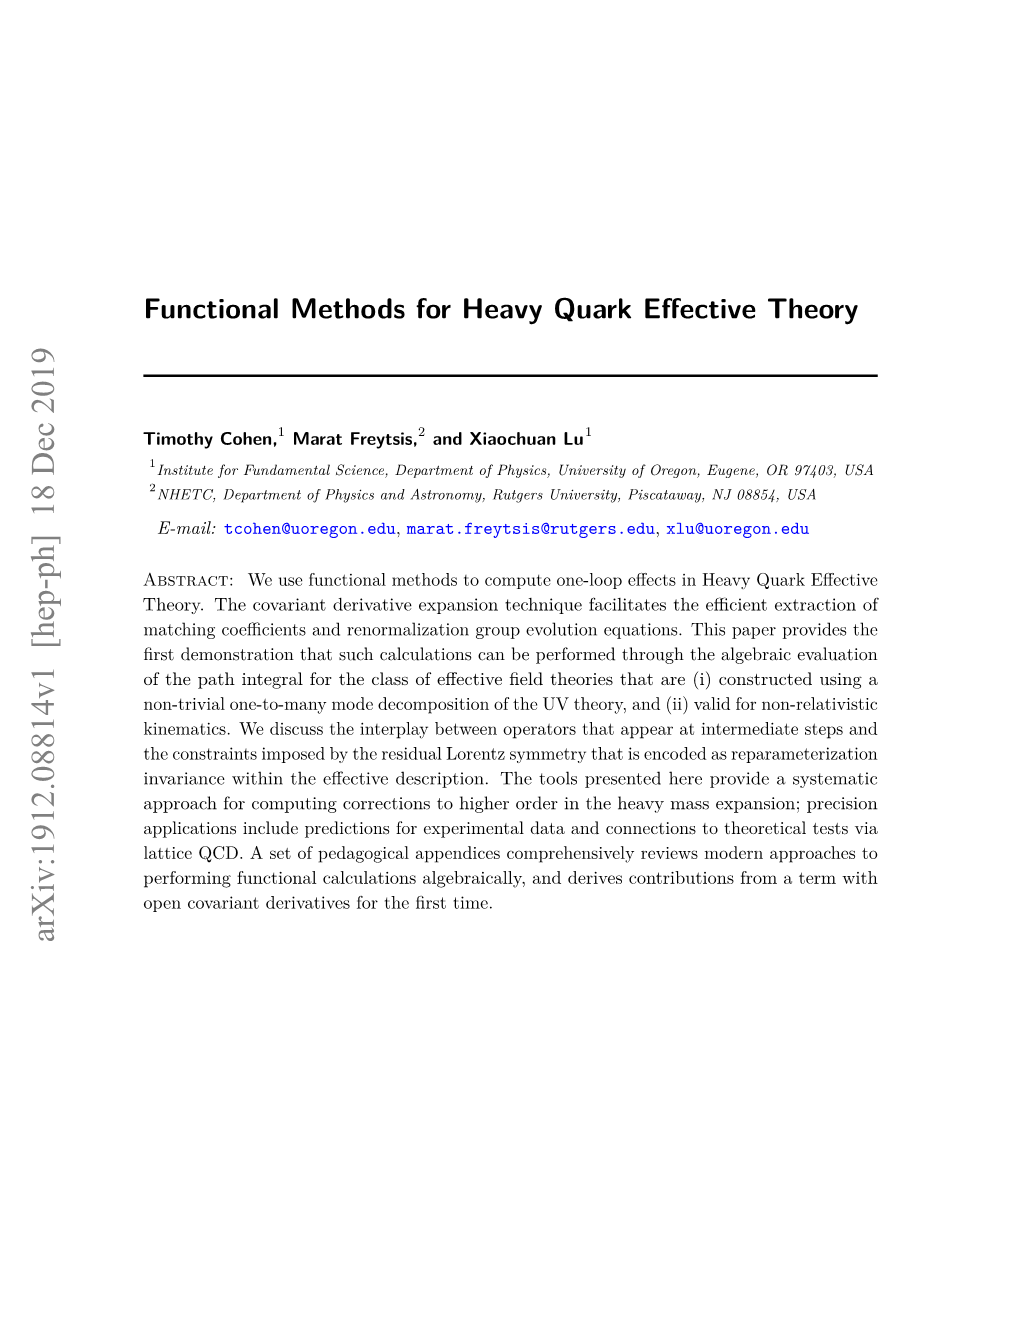 Functional Methods for Heavy Quark Effective Theory